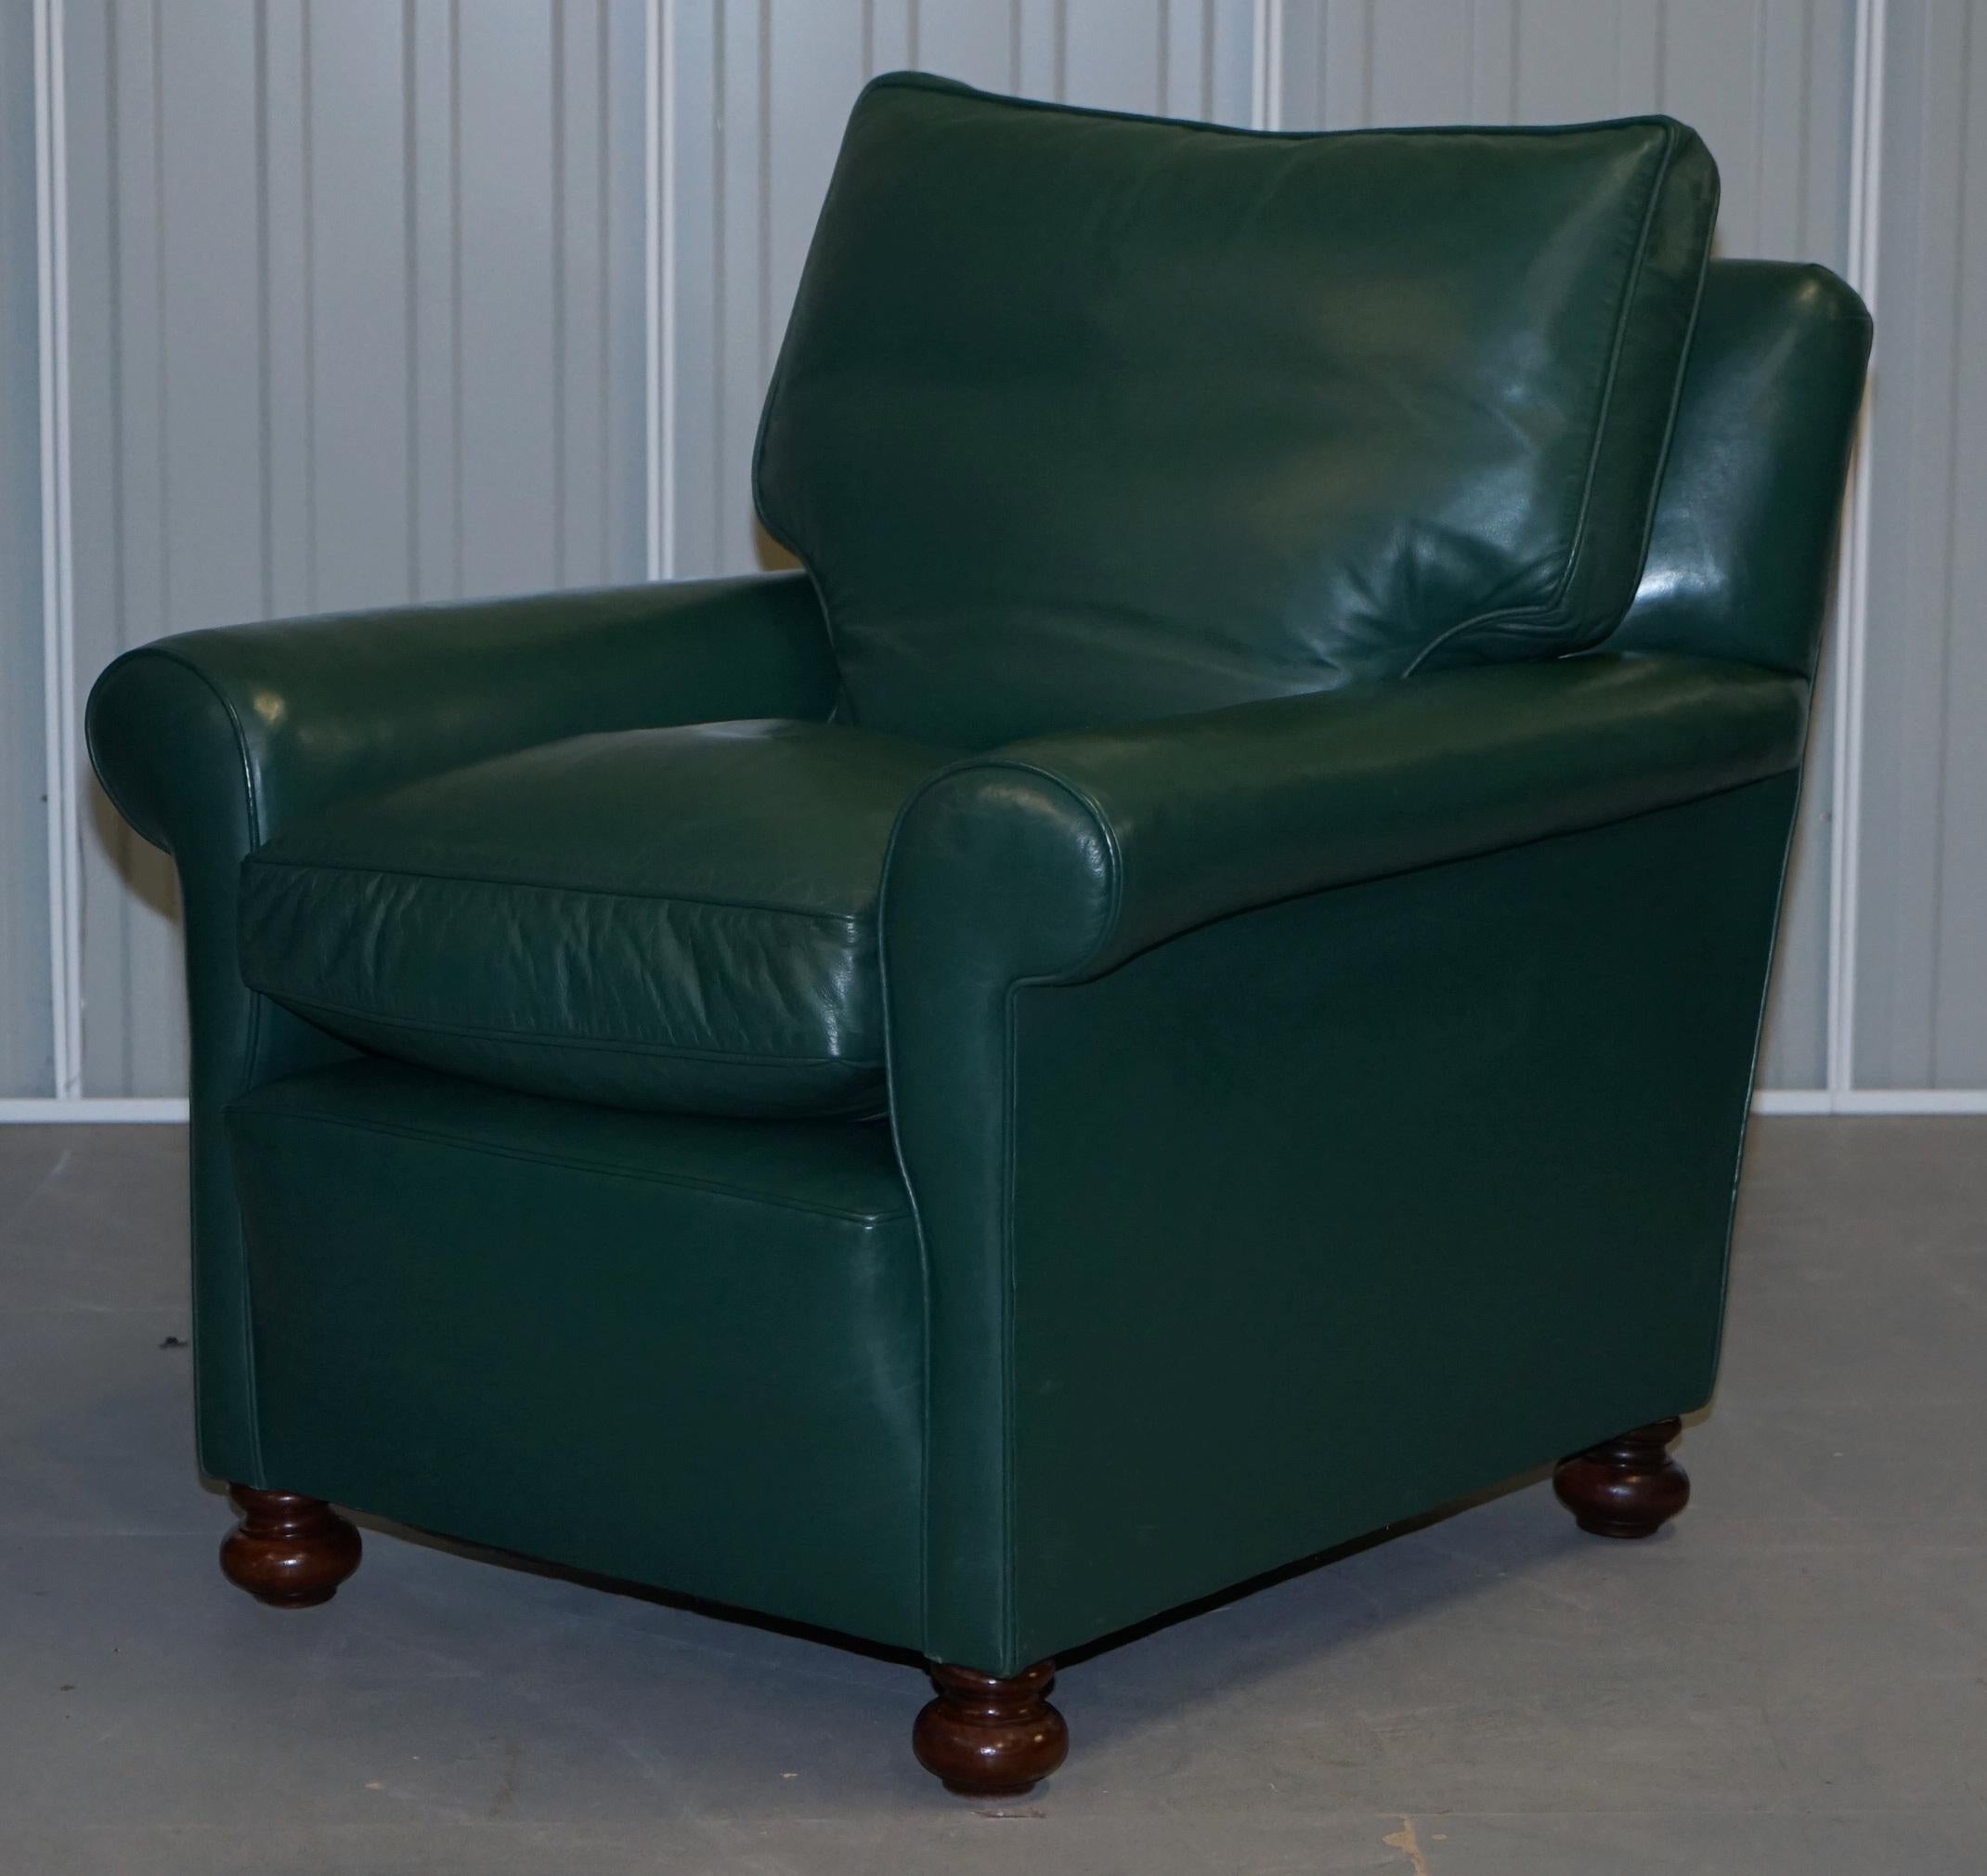 Hand-Crafted Pair of Edwardian circa 1910 Soft Green Leather Feather Filled Cushion Armchairs